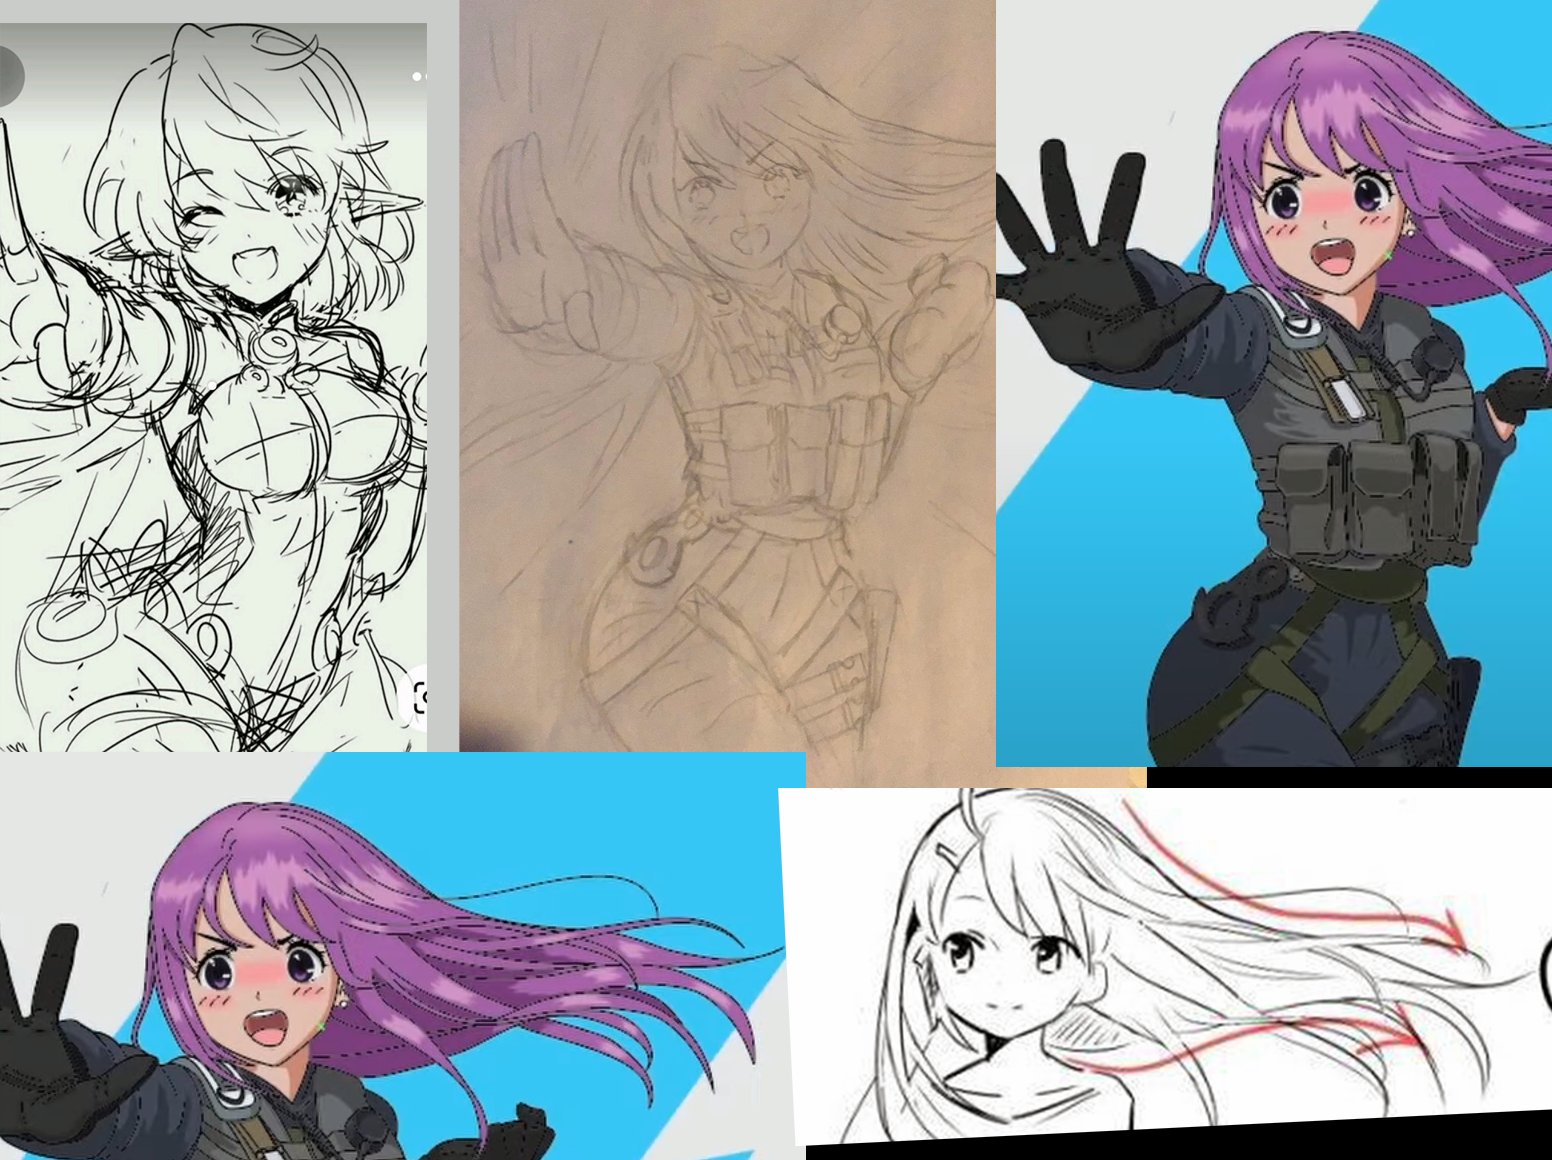 Comparison of the M4A4 skin with drawings by different authors